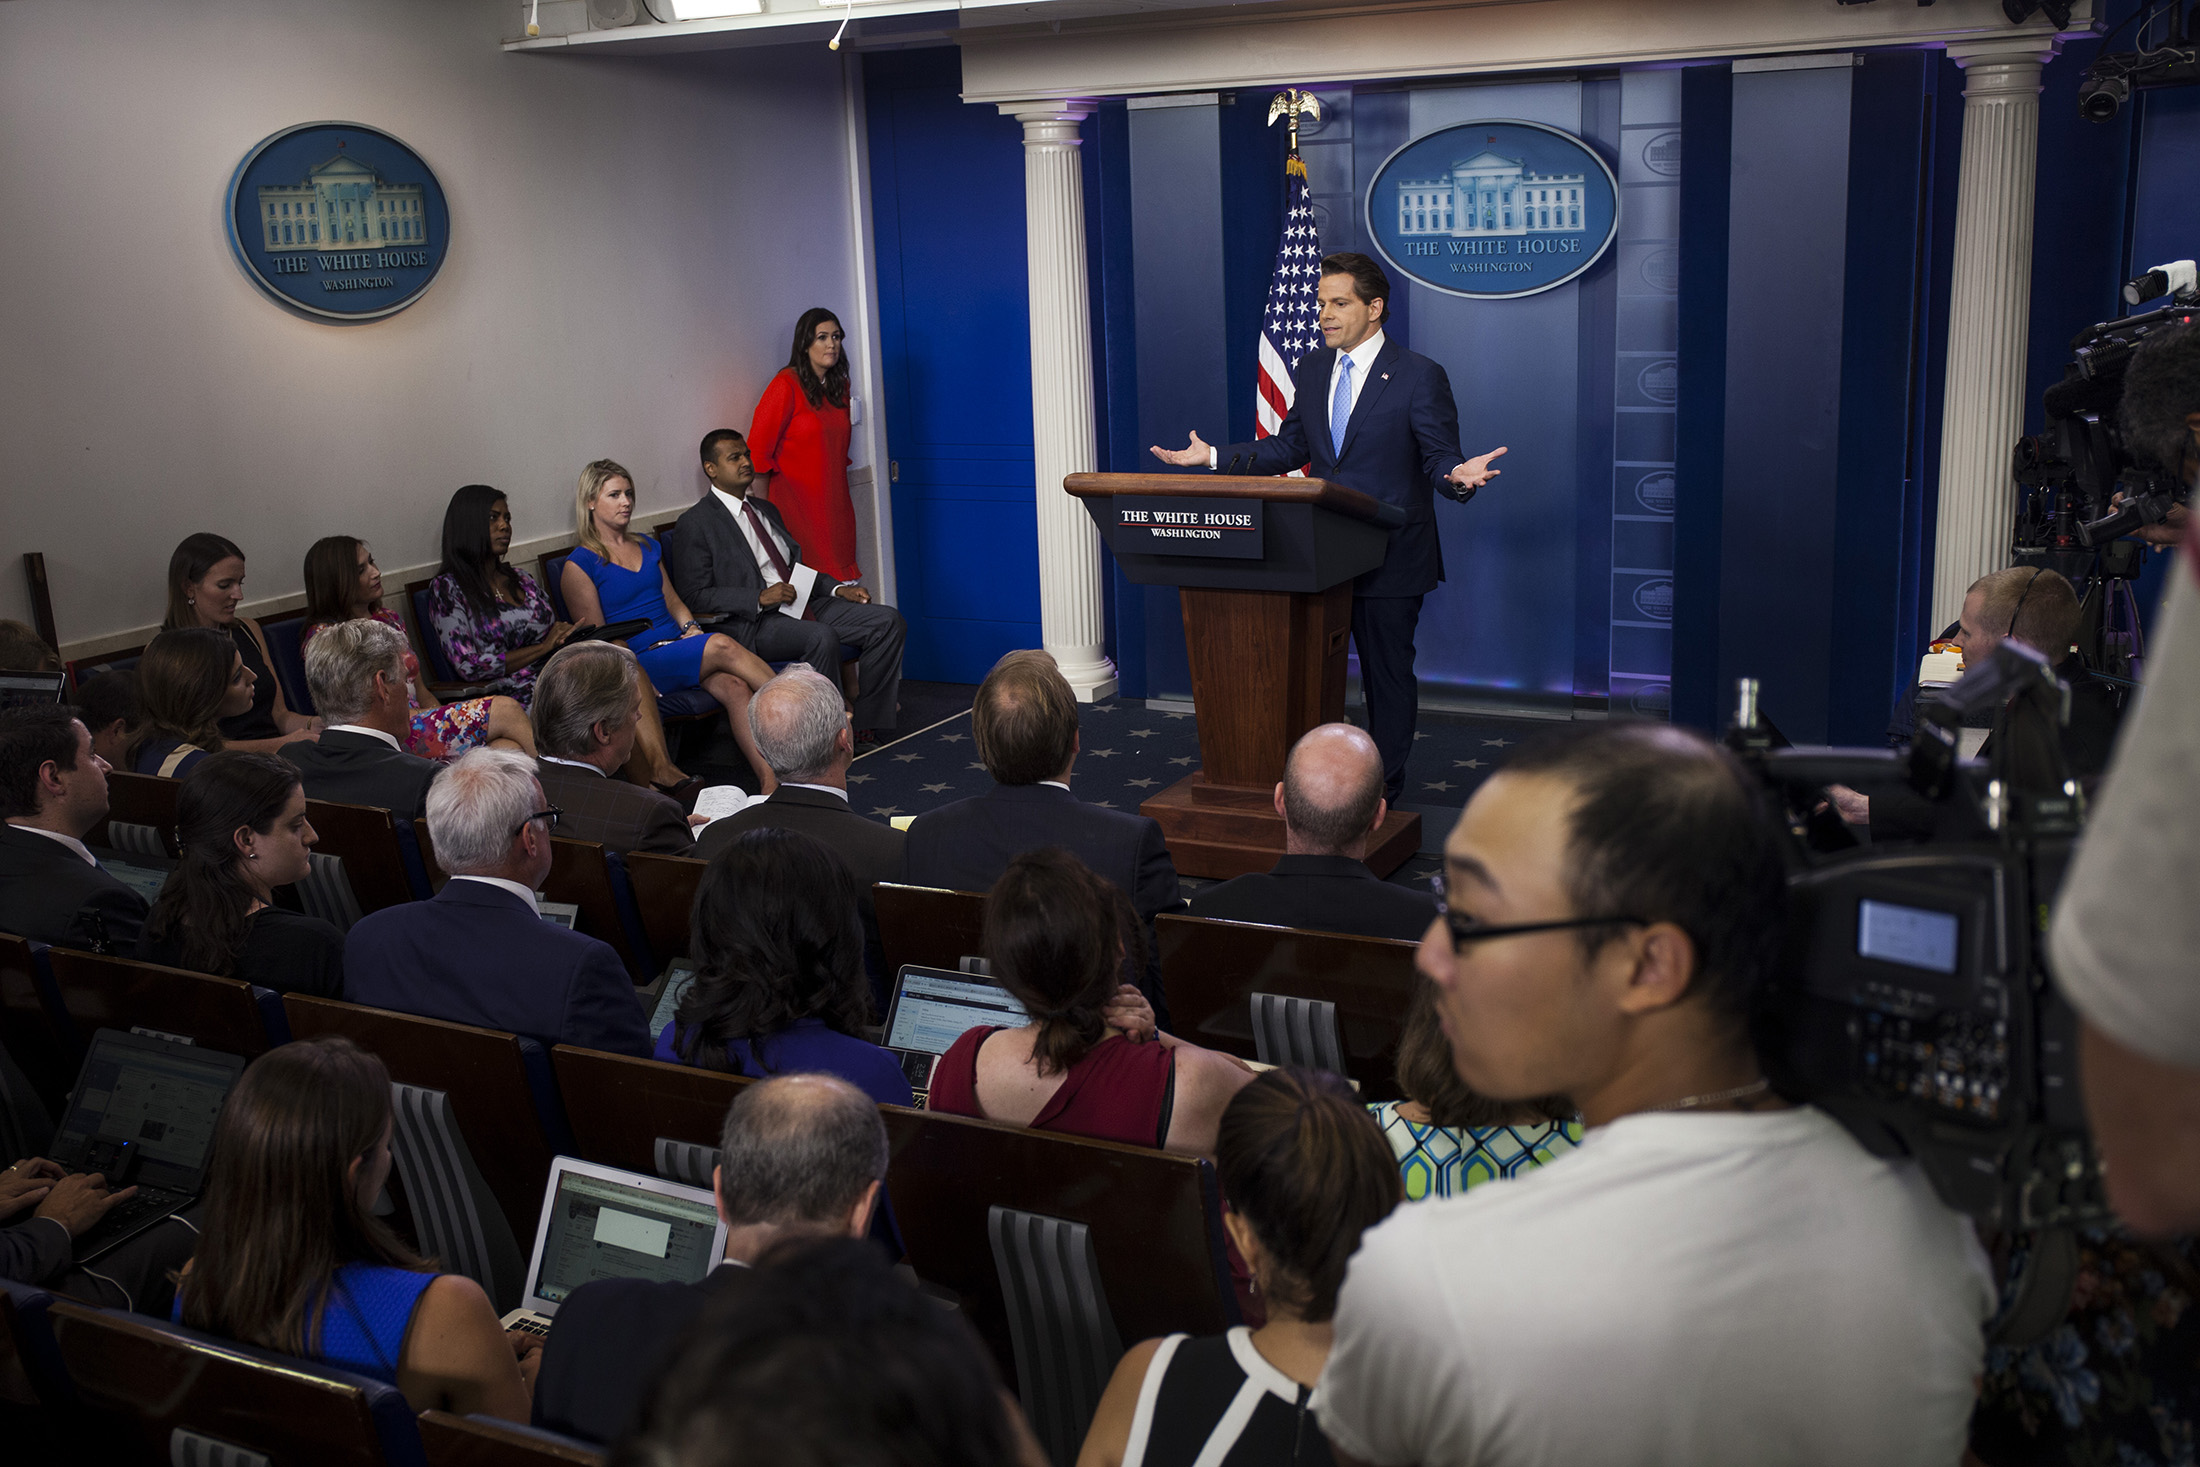 Anthony Scaramucci, director of communications for the White House, speaks during a White House press briefing in Washington, D.C., U.S., on Friday, July 21, 2017.
